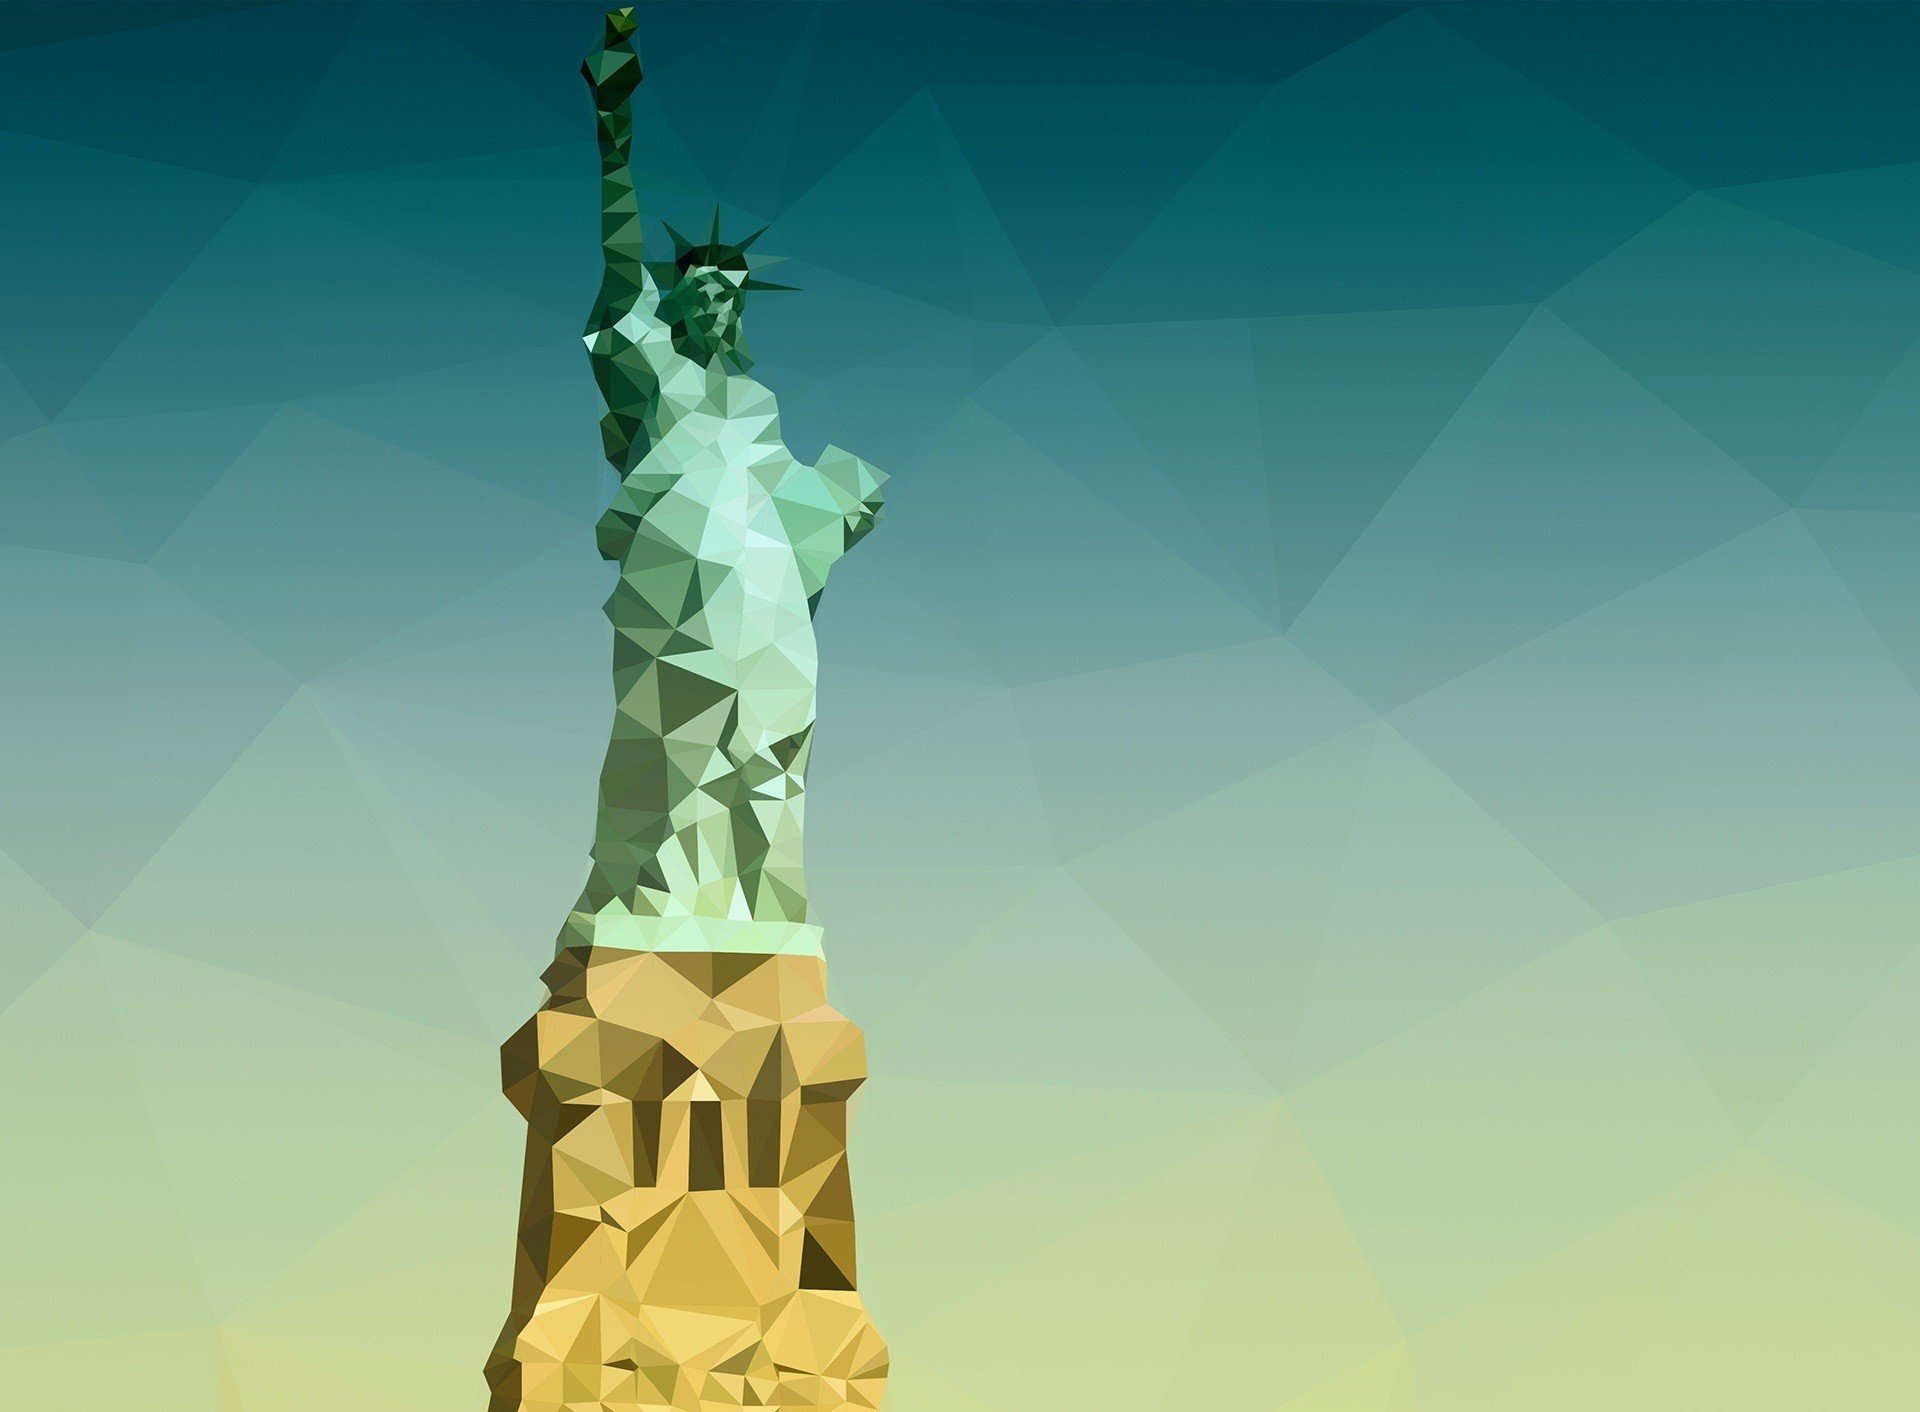 Statue of Liberty, Triangle, Adobe Photoshop, Blue, Low poly Wallpaper